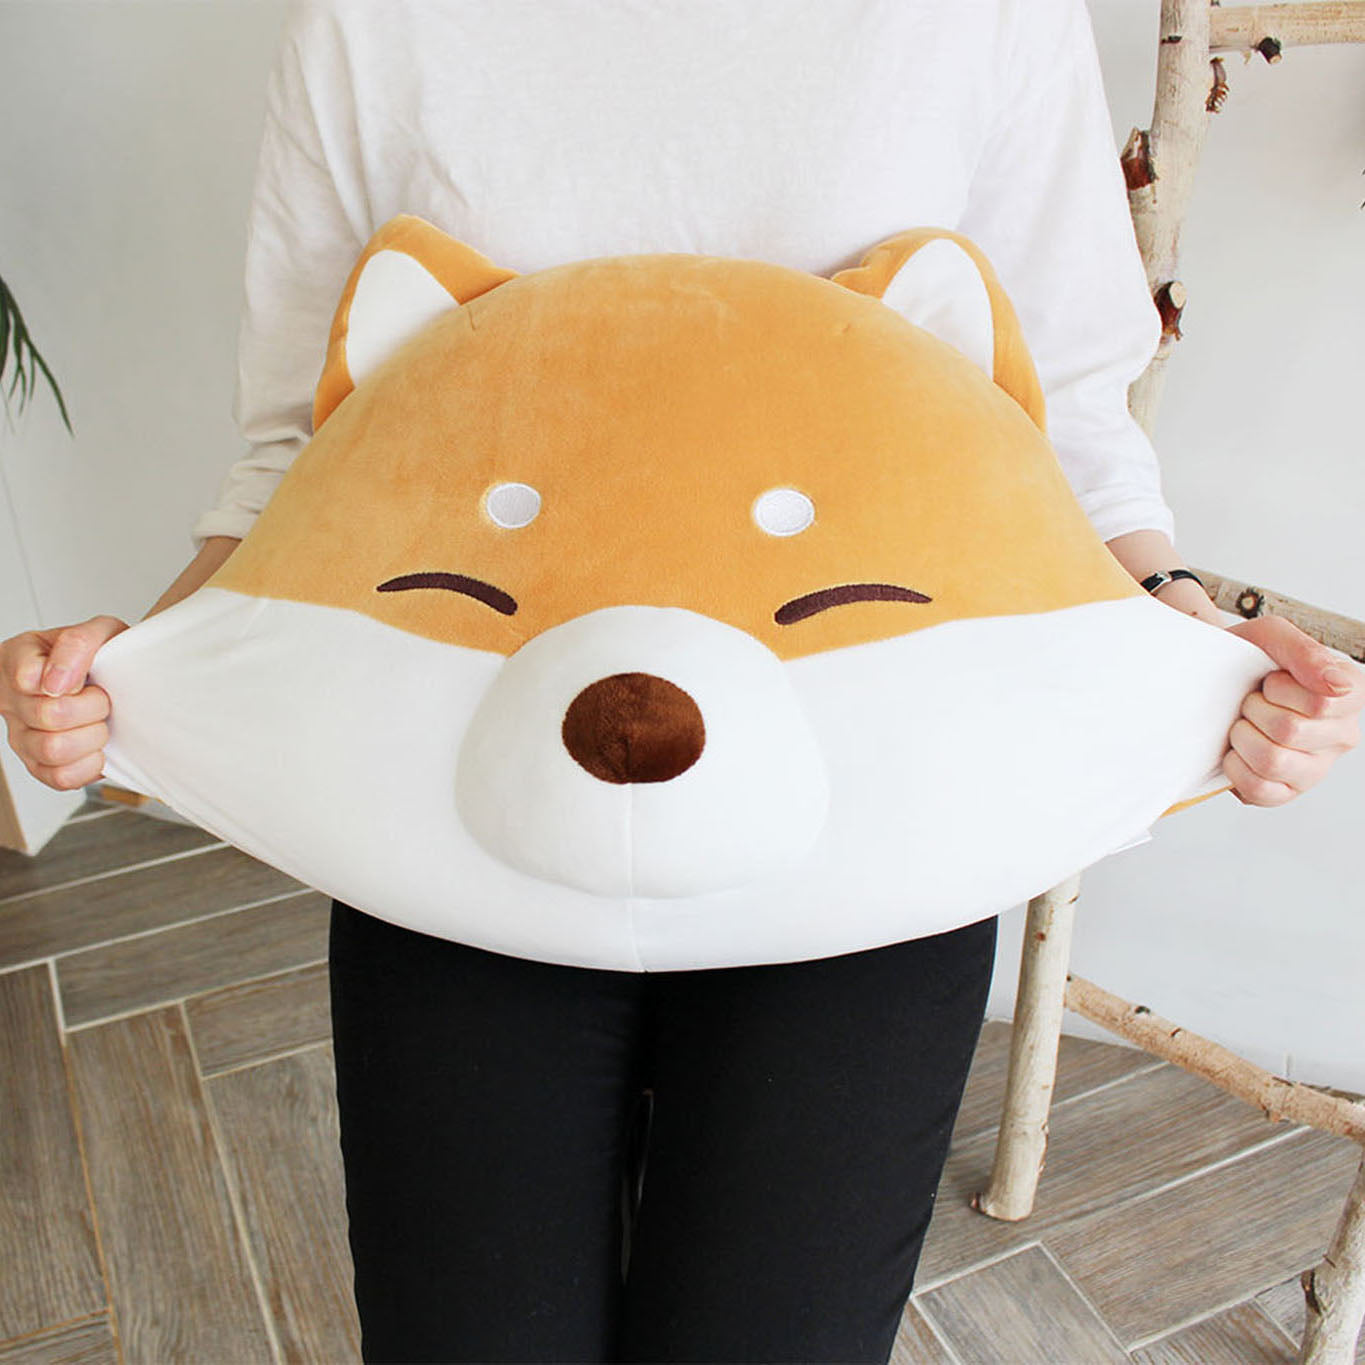 Front view of model stretching the Shiba cushion's cheeks with plants in the background.